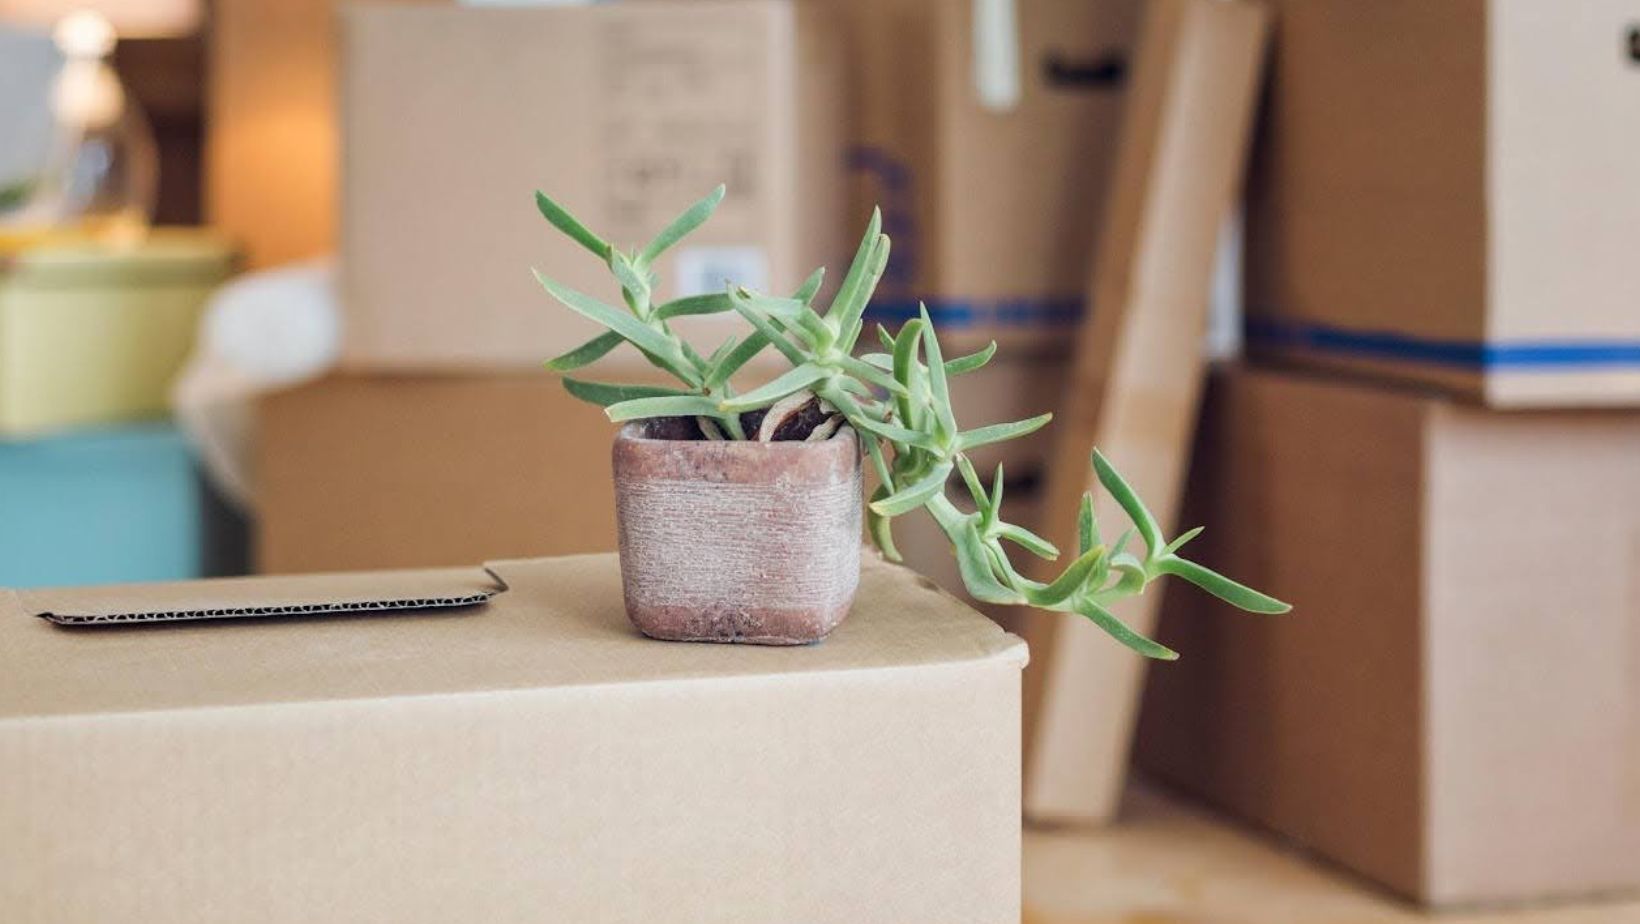 Moving boxes with a plant sitting on top of them